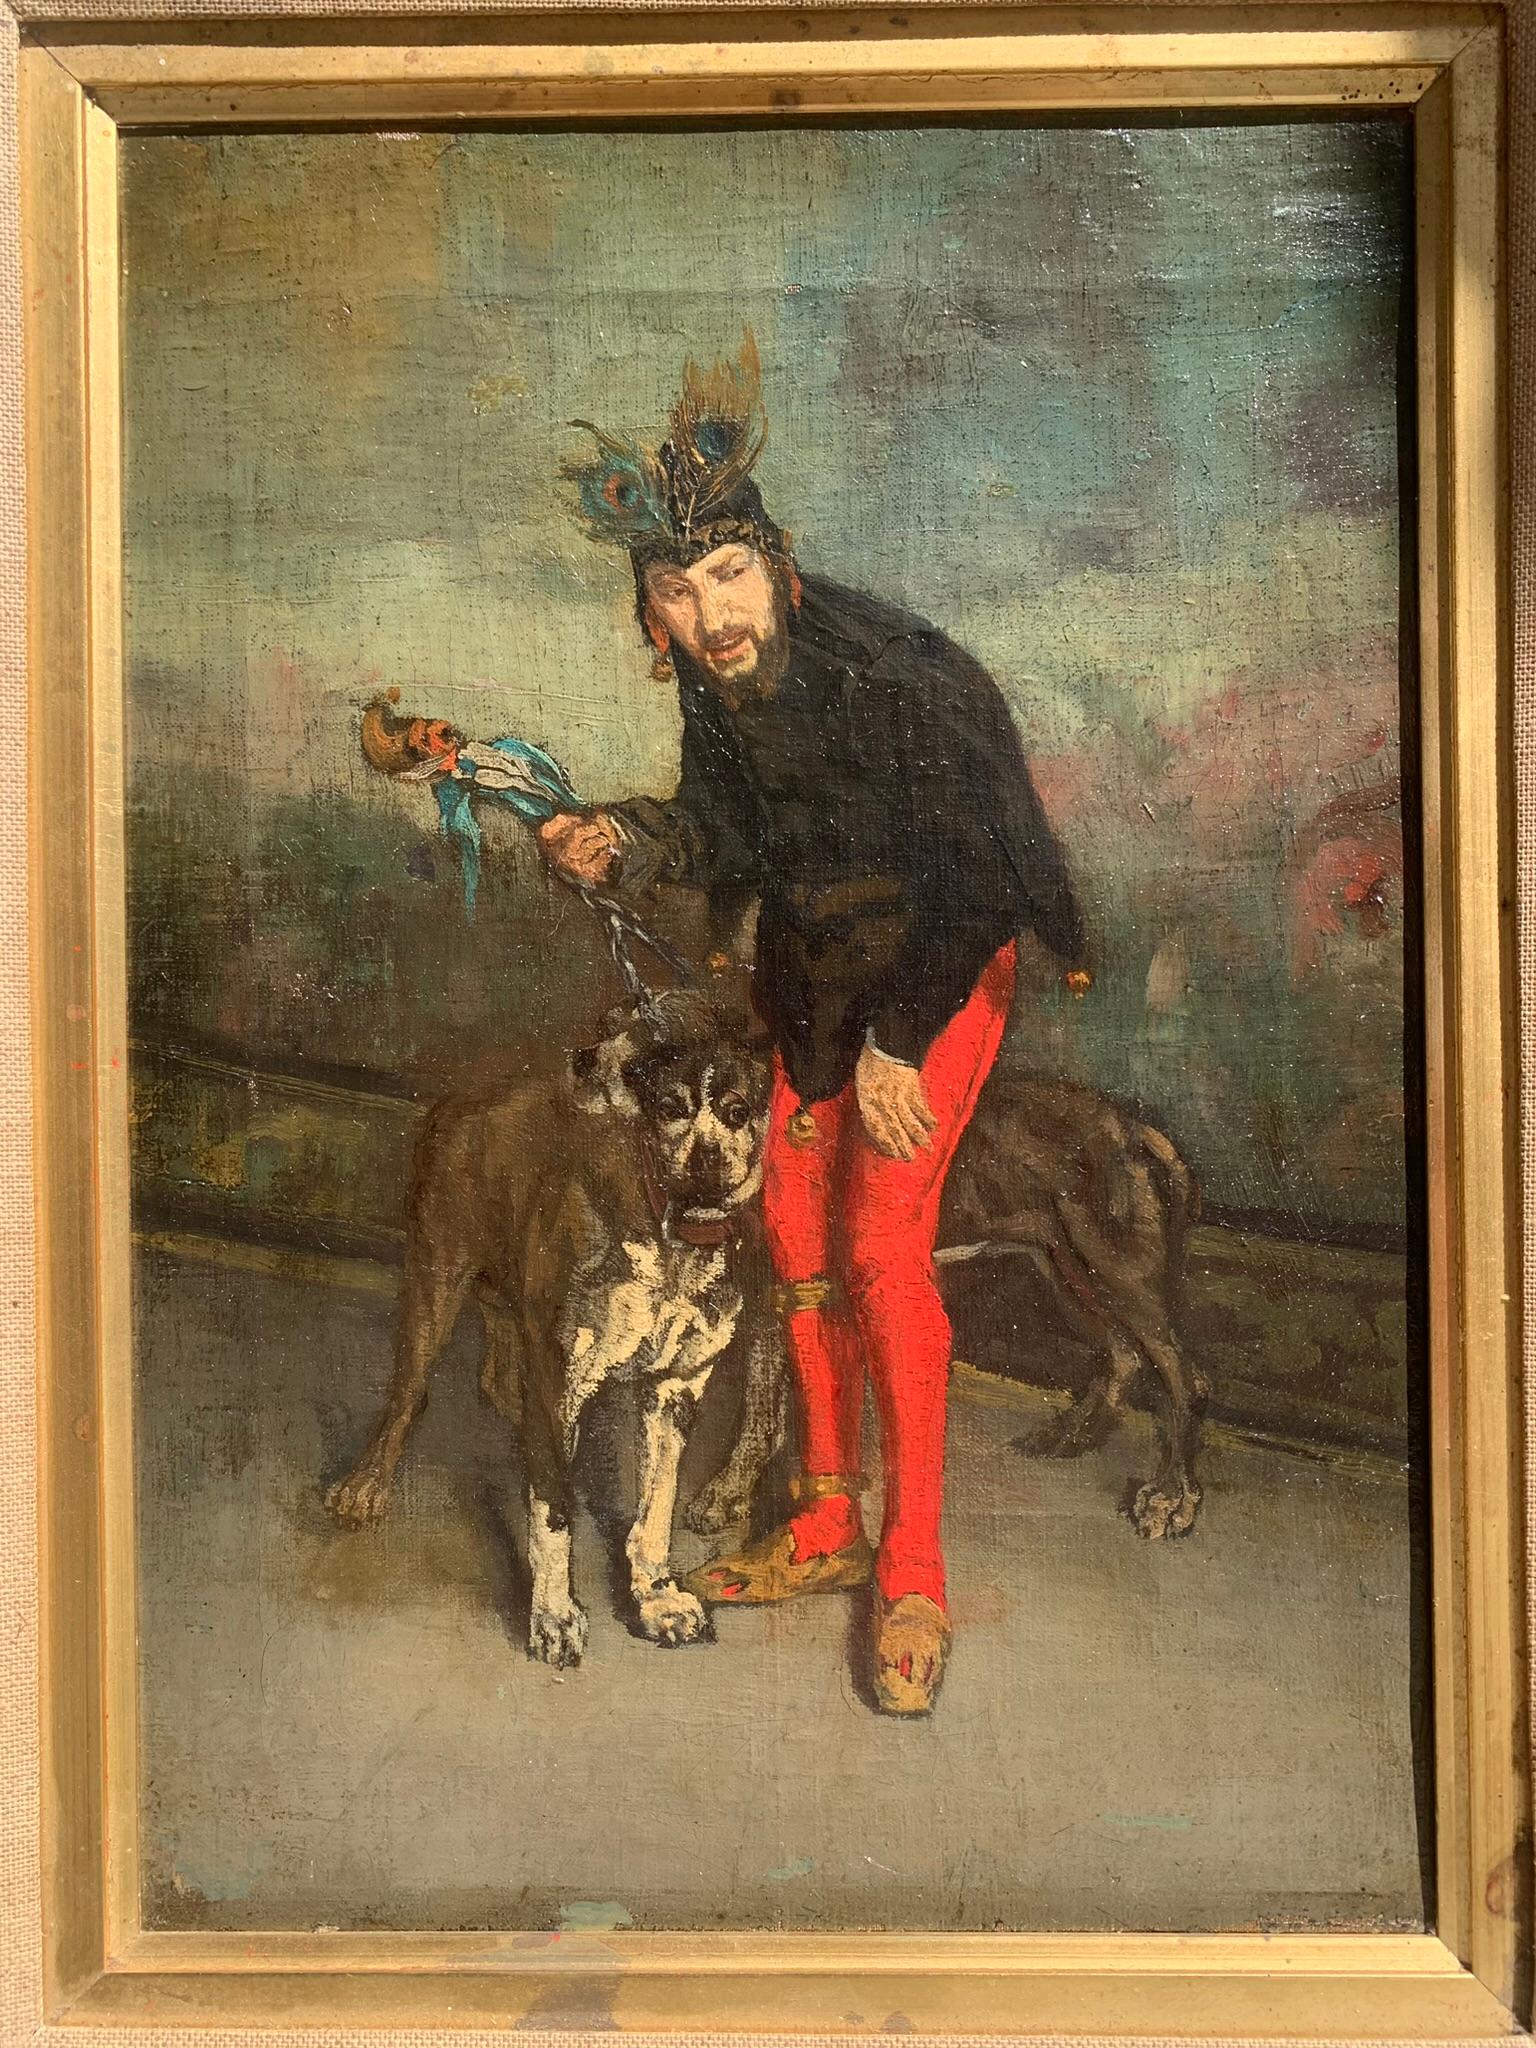 Unknown Figurative Painting - A court jester with dogs. Late 19th century.